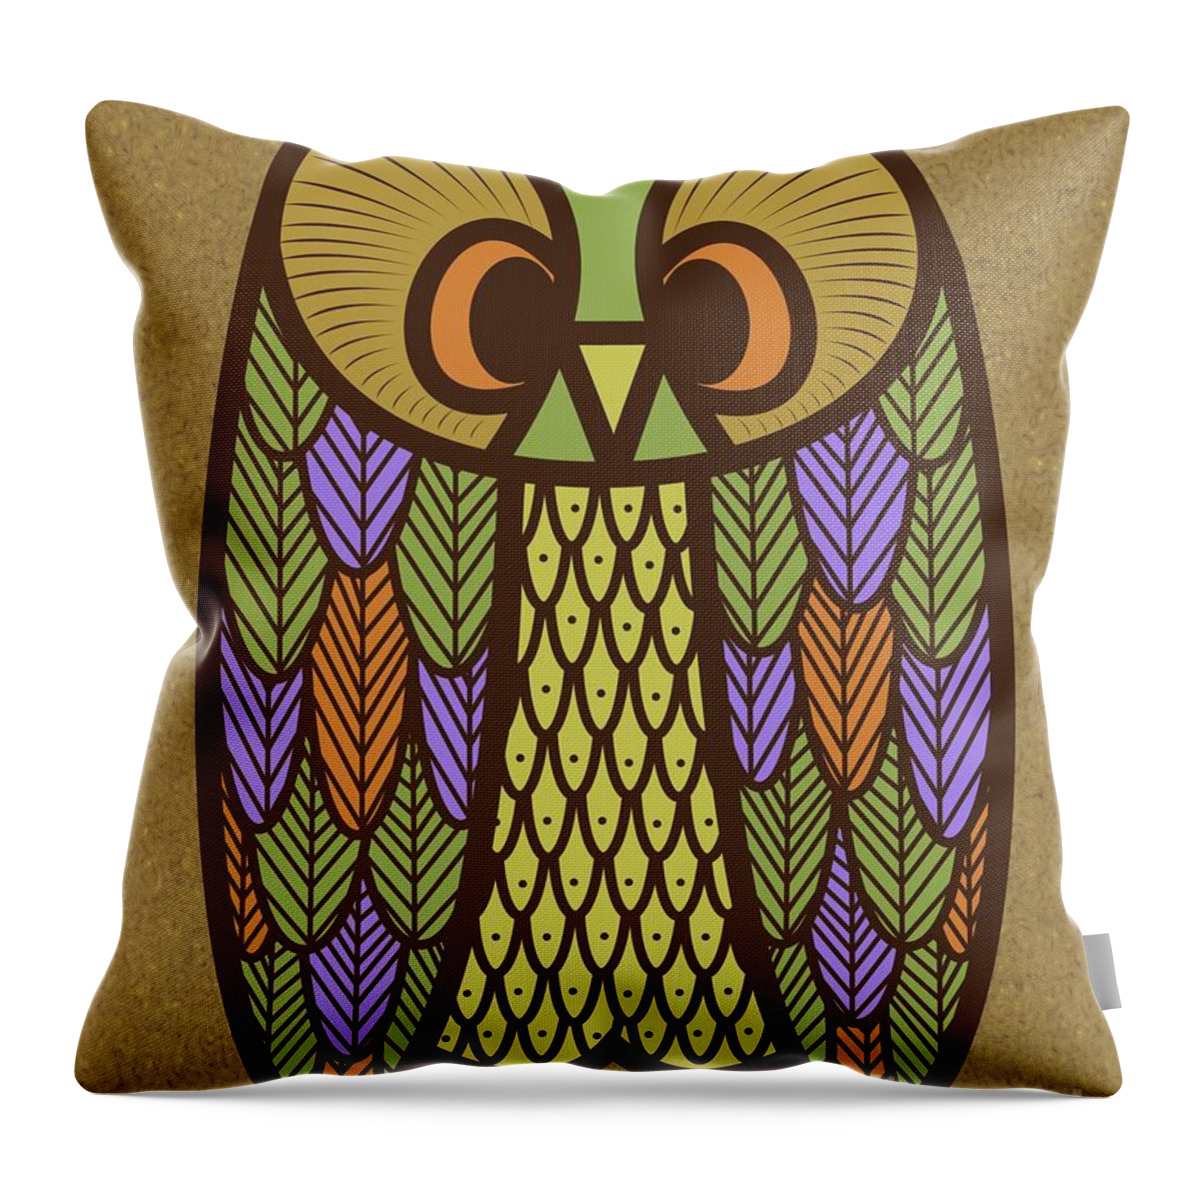 Owl Throw Pillow featuring the digital art Owl 2 by Donna Mibus